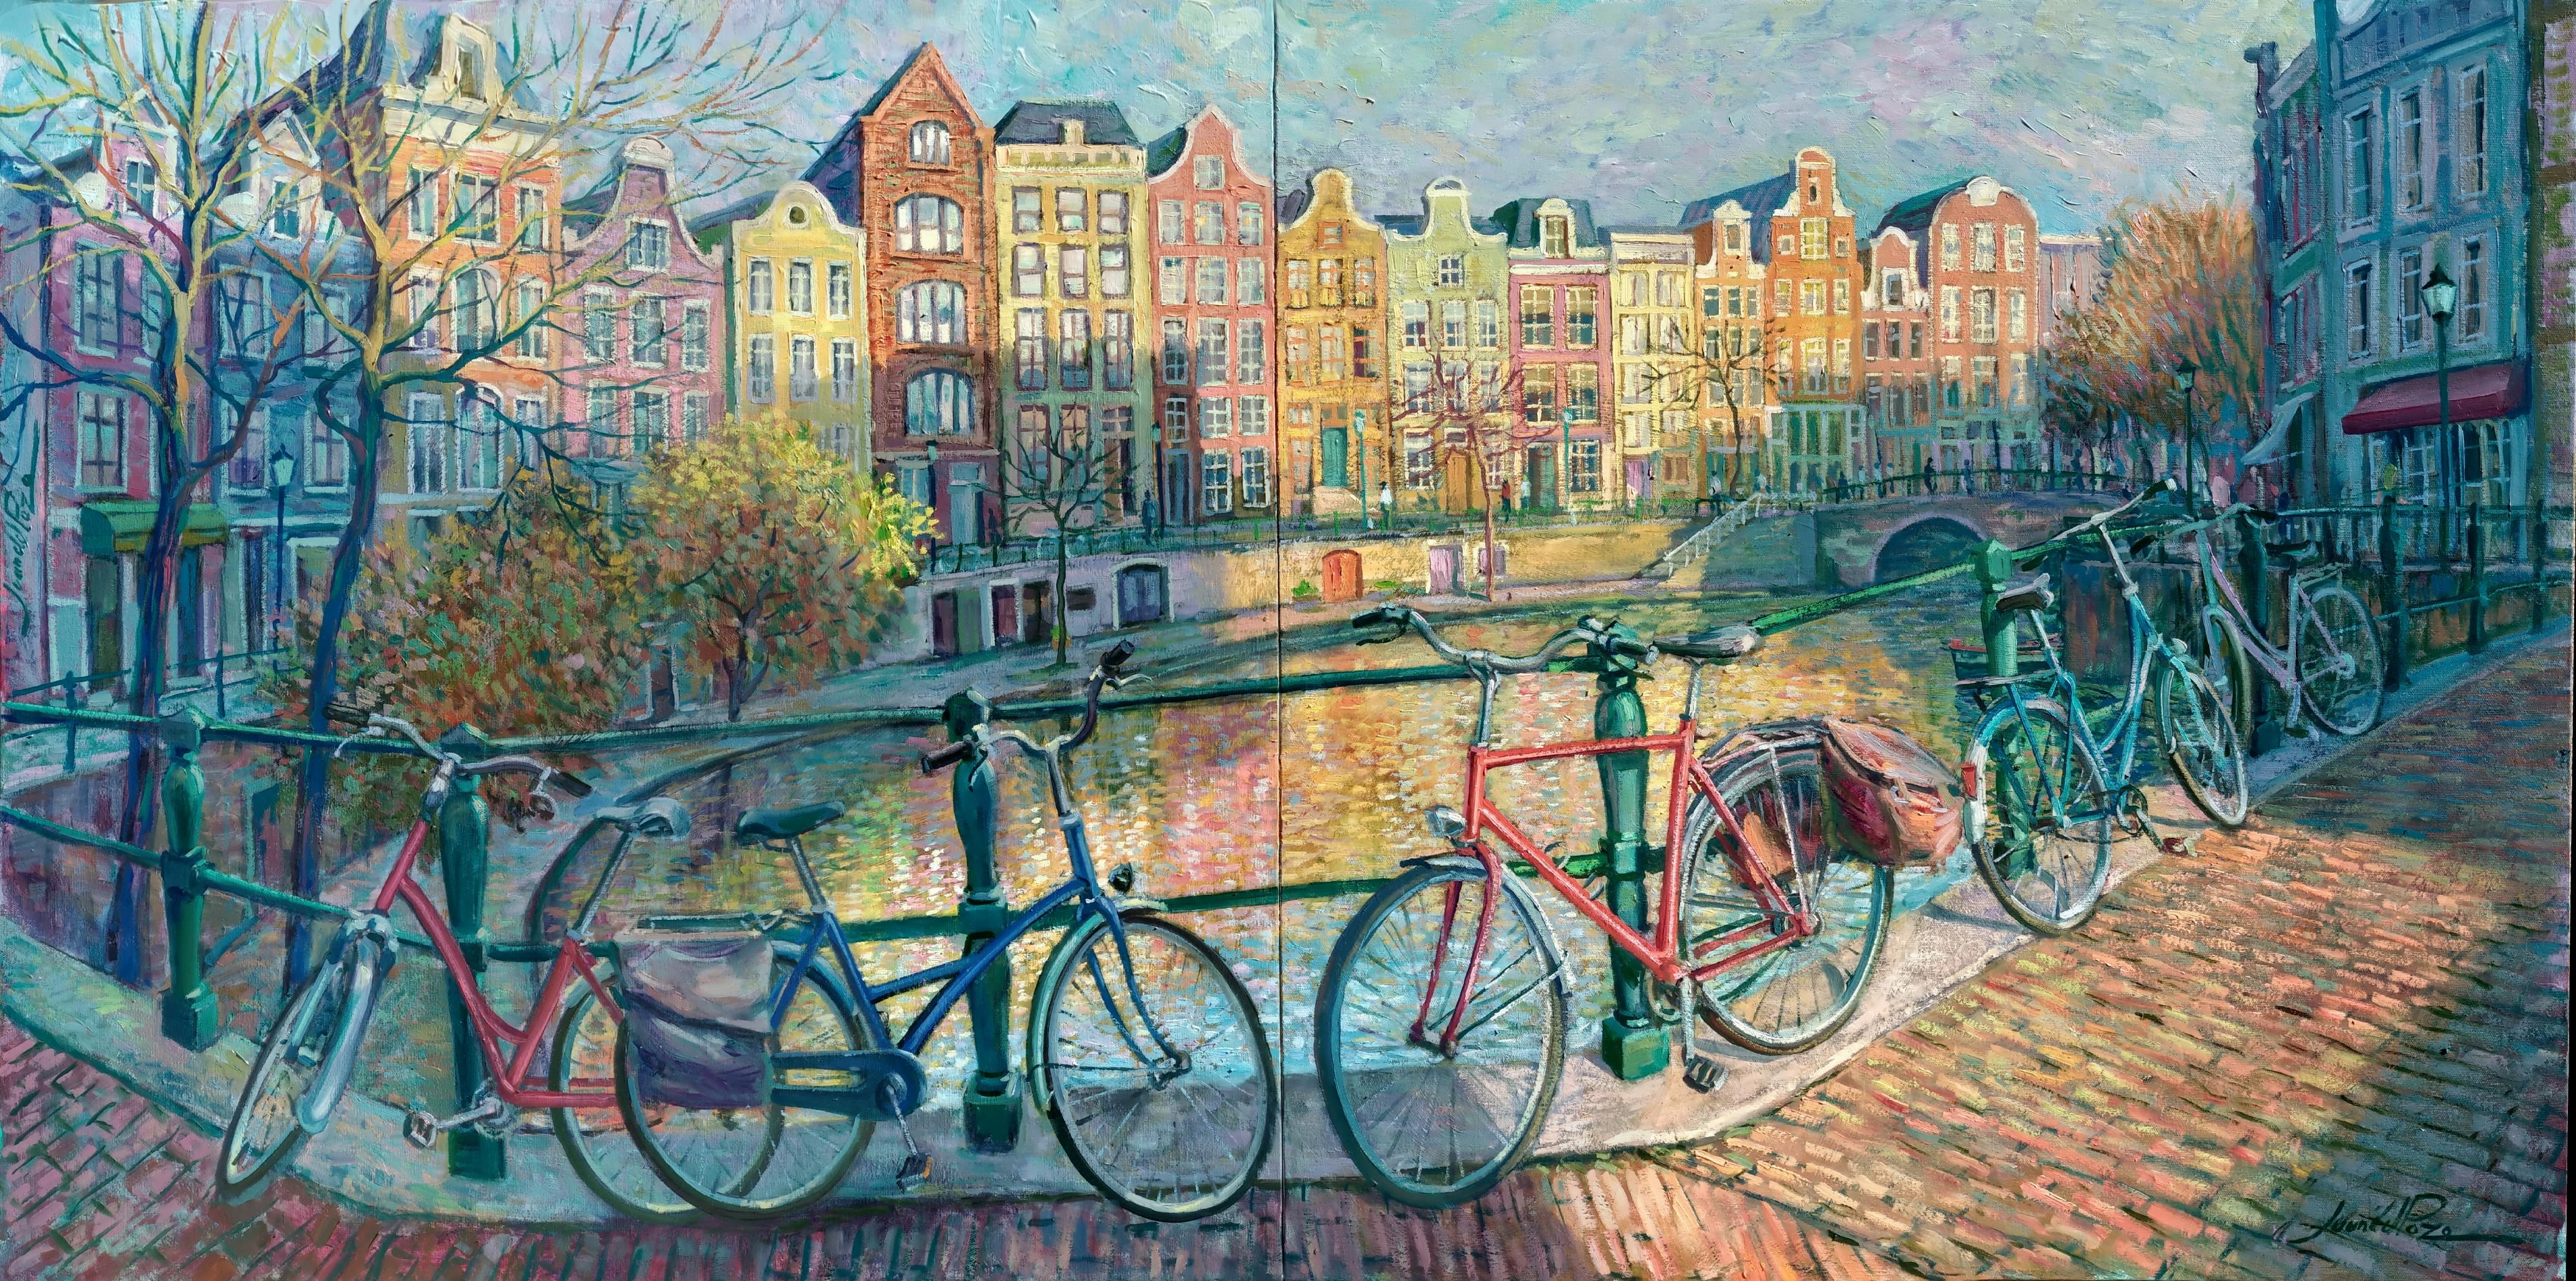 Juan del Pozo Abstract Painting - Amsterdam NETHERLANDS original cityscape painting  Art Impressionism 21st